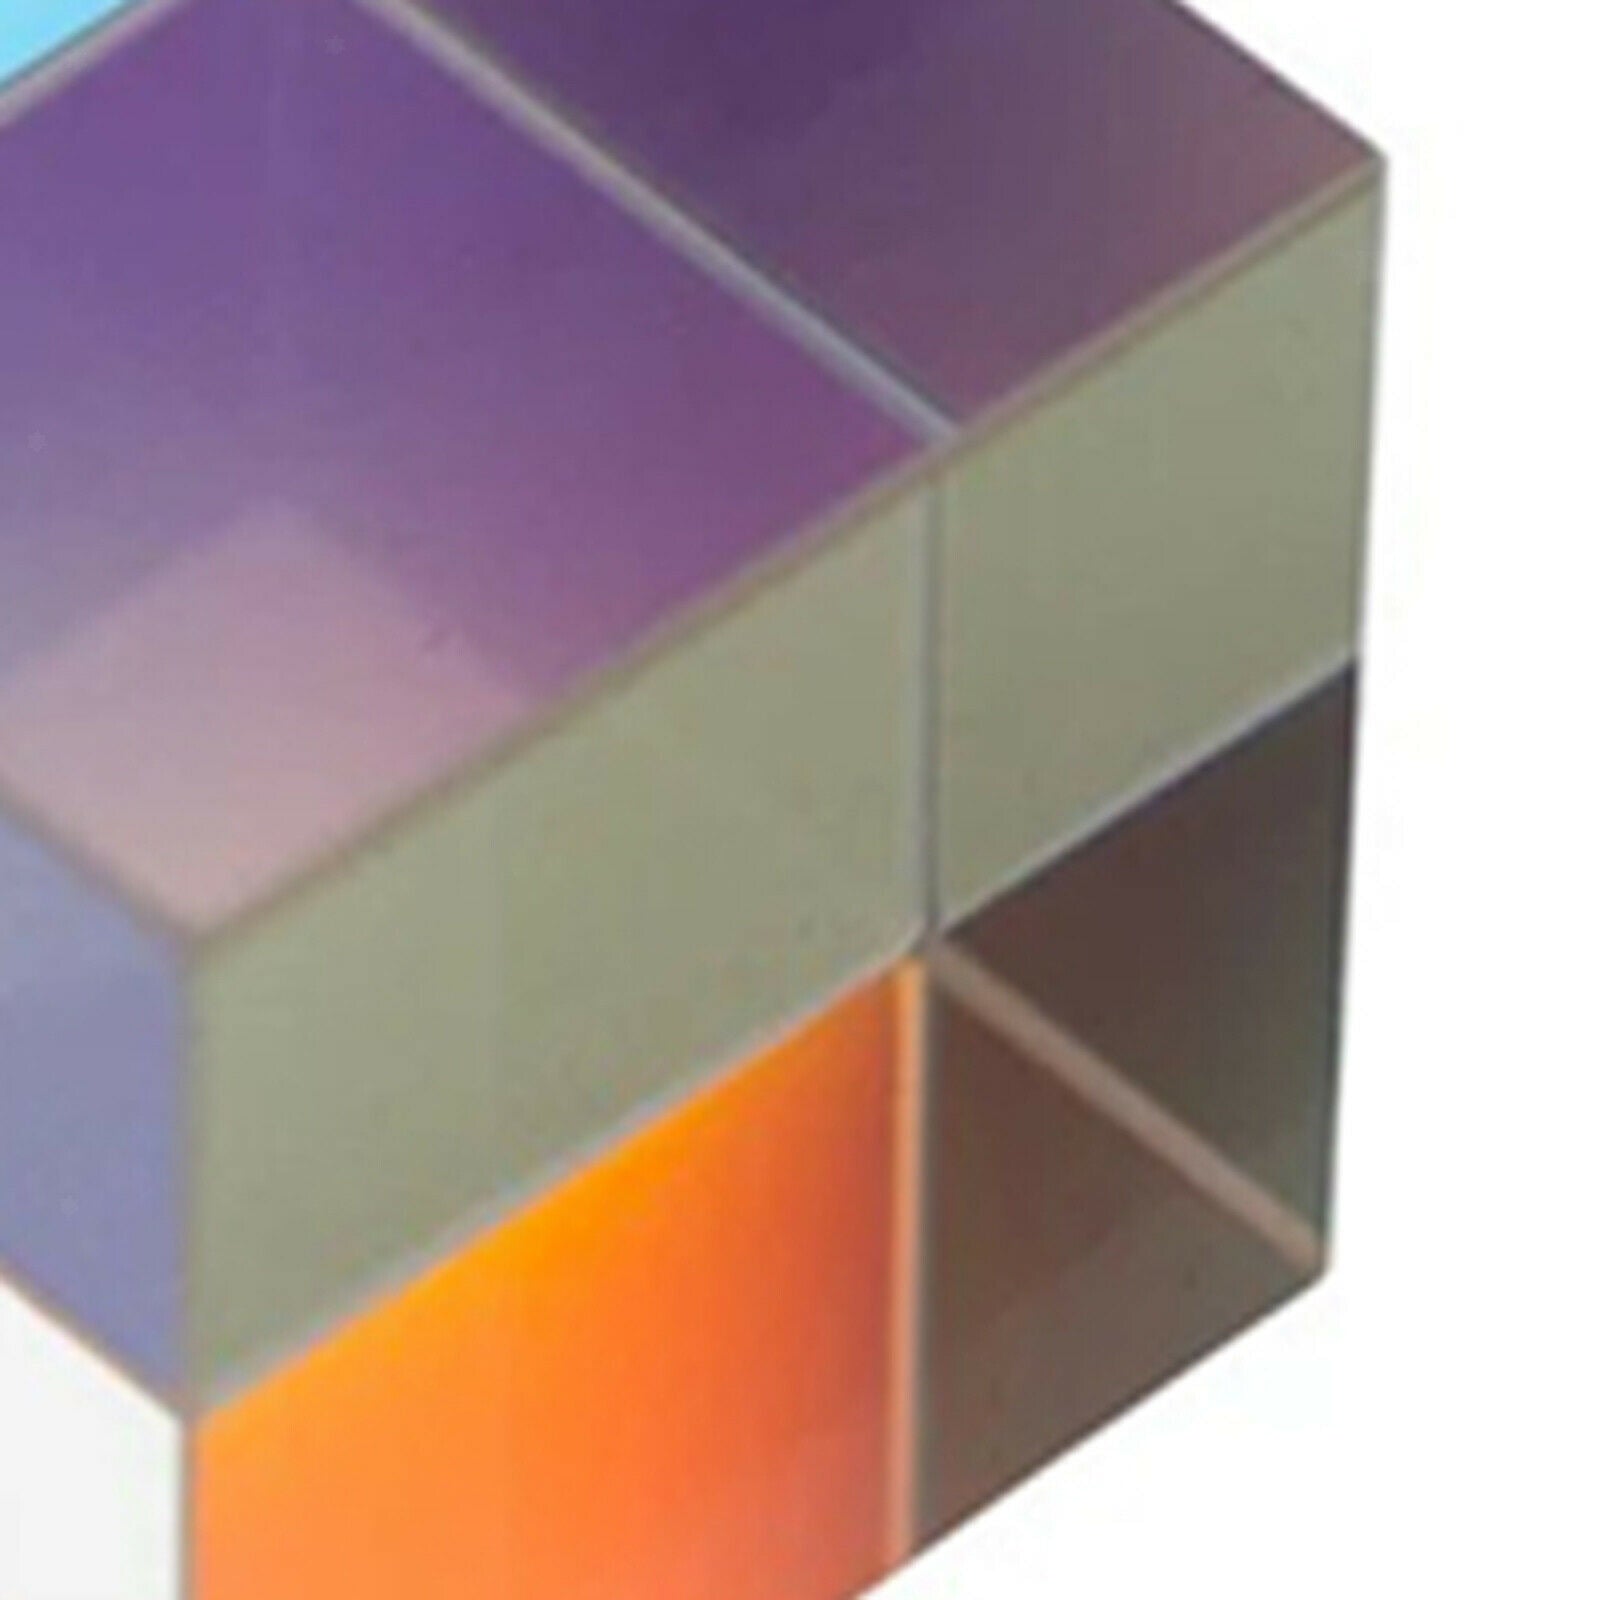 Six--Sided Polished Prism Color Bright Light Combine Cube for Gift for Kids